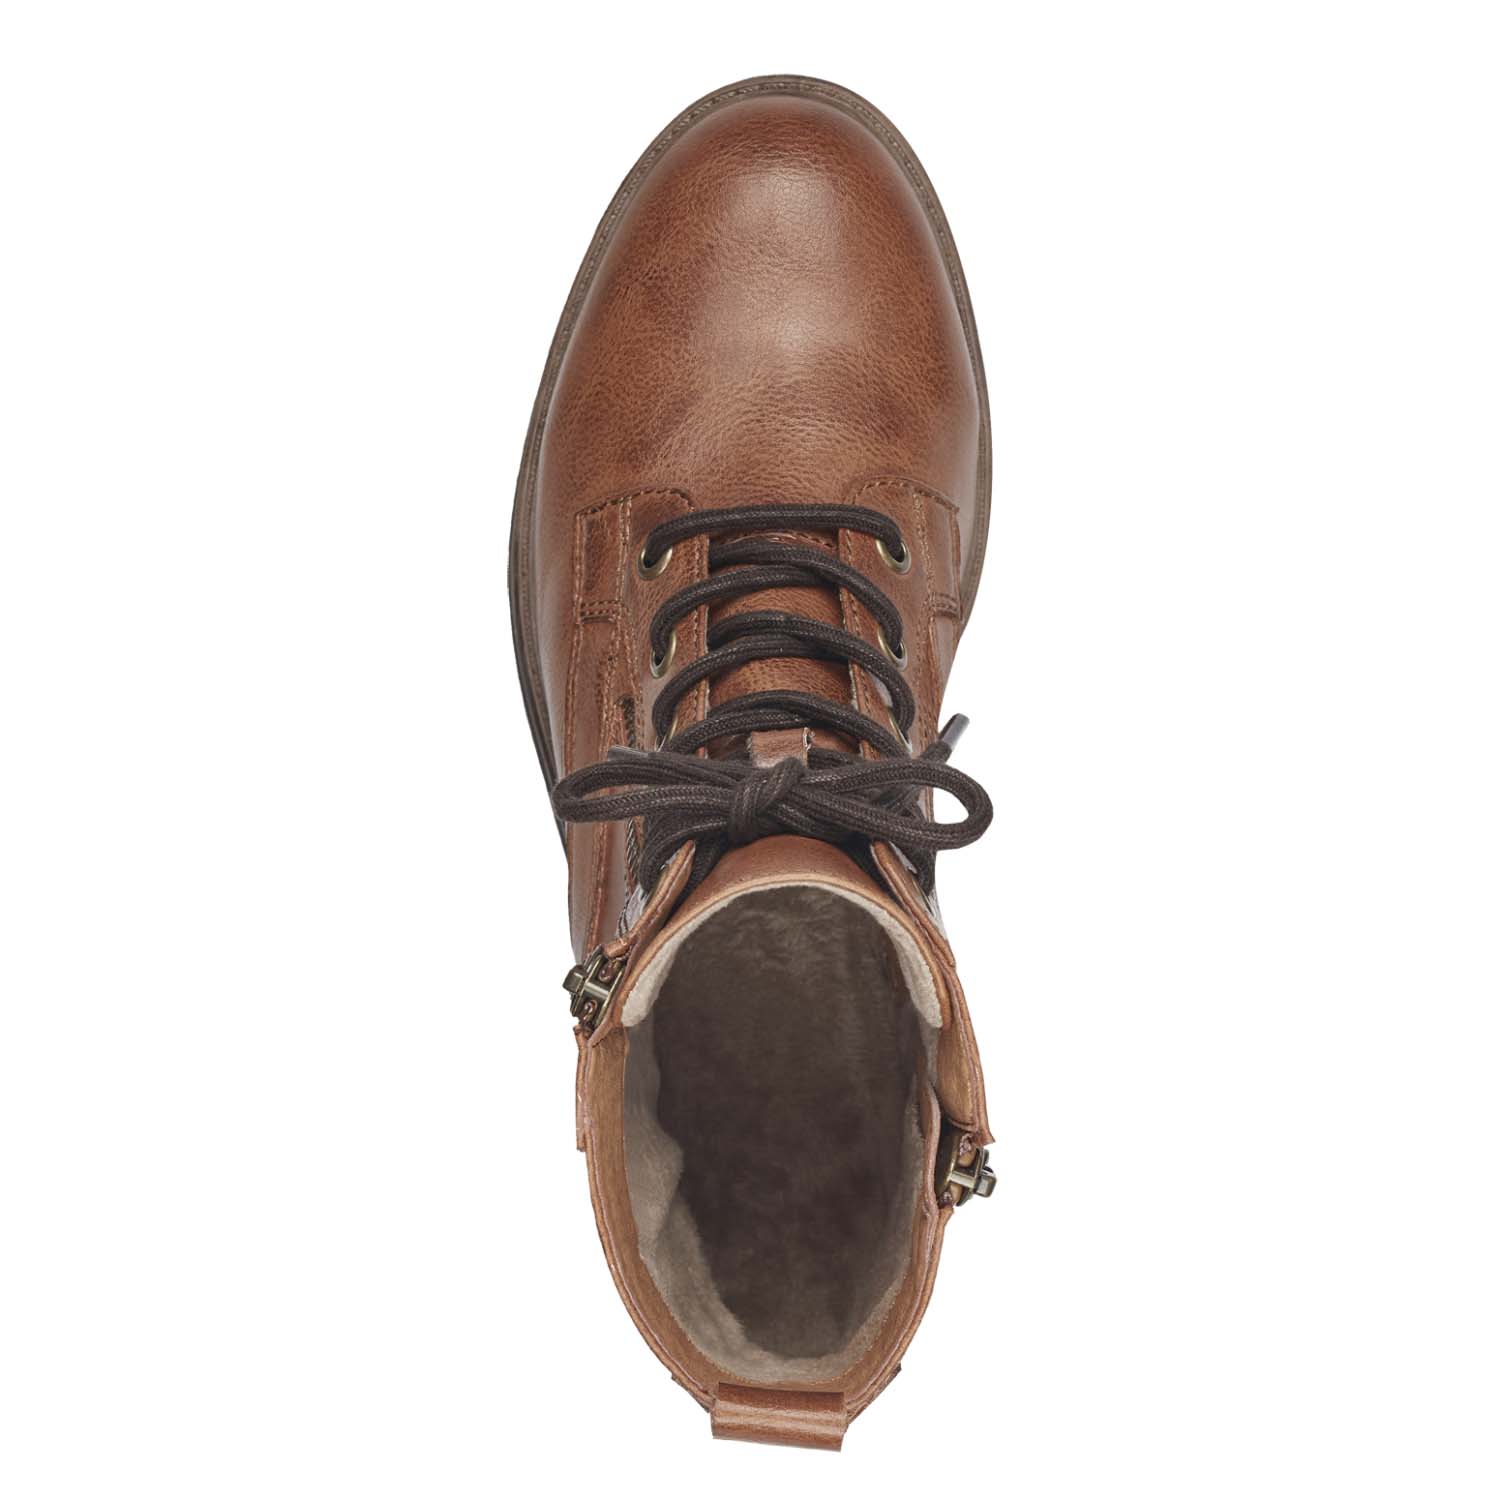 Front view of the Brown Lace-Up Ankle Boot